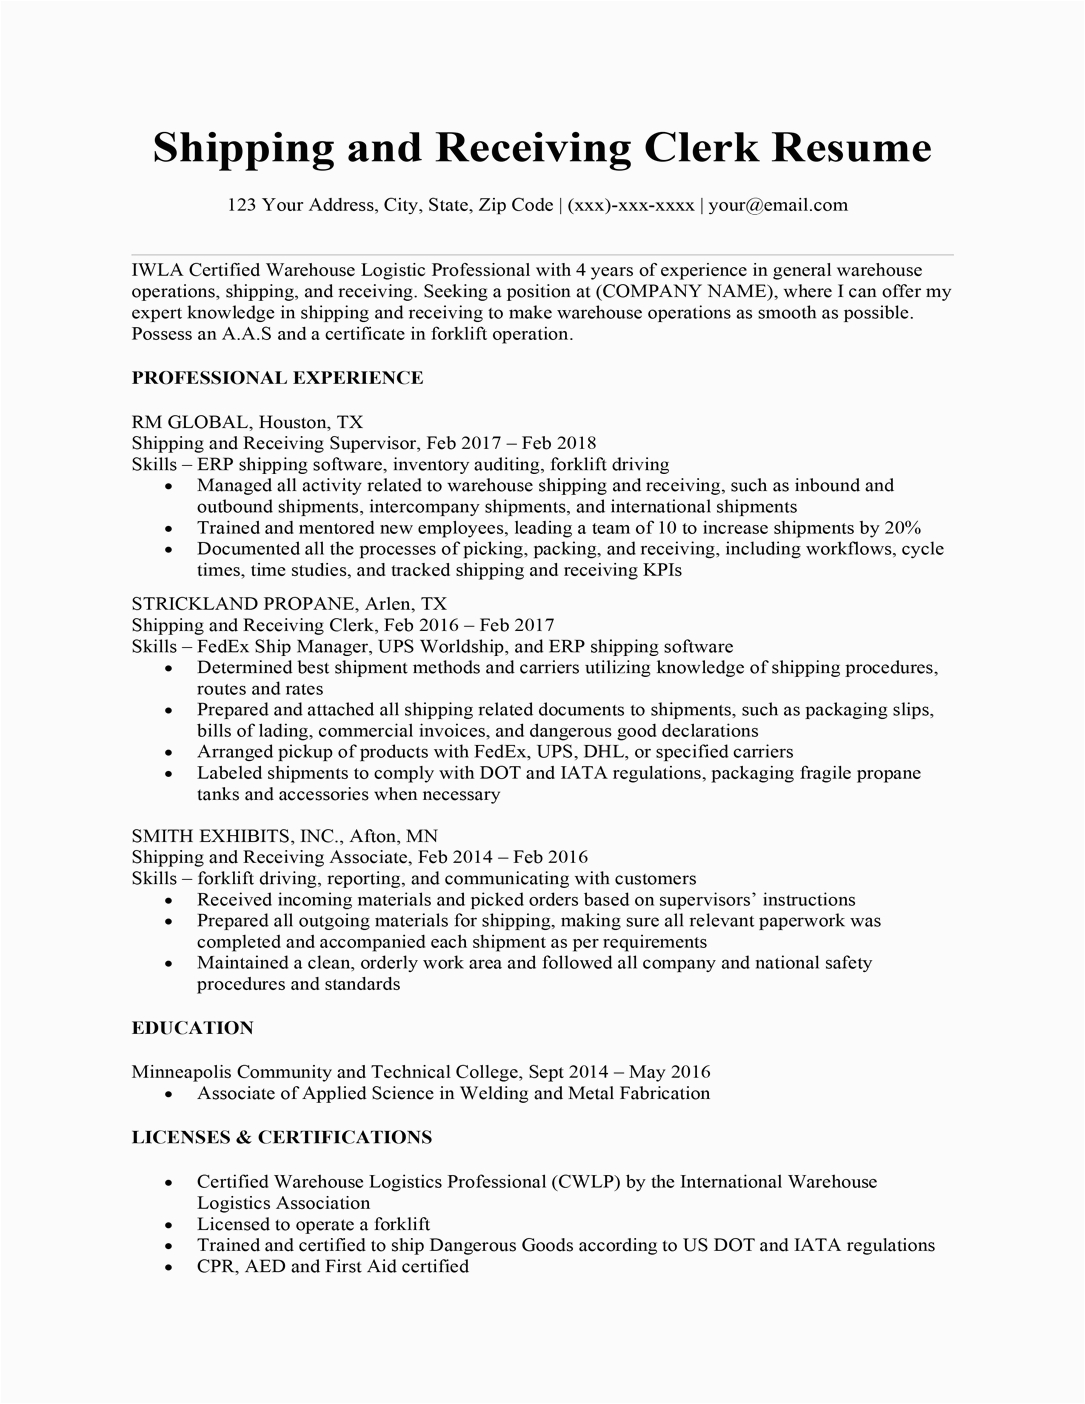 Resume Samples for Shipping and Receiving Clerk Shipping and Receiving Clerk Resume Sample & Writing Tips